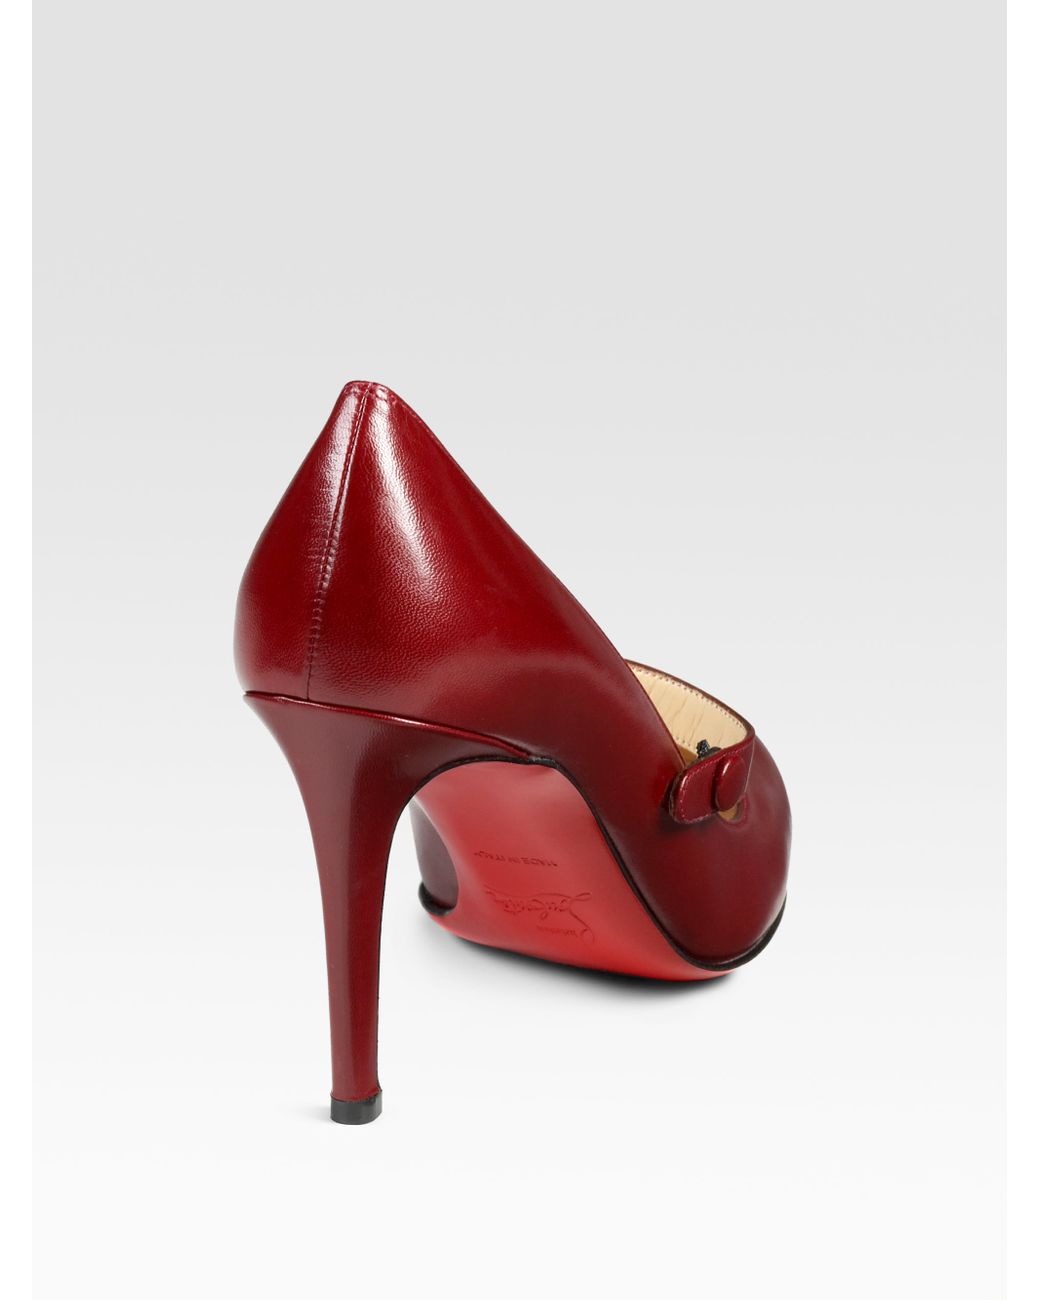 Christian Louboutin Wallis Mary Jane Pumps in Red | Lyst